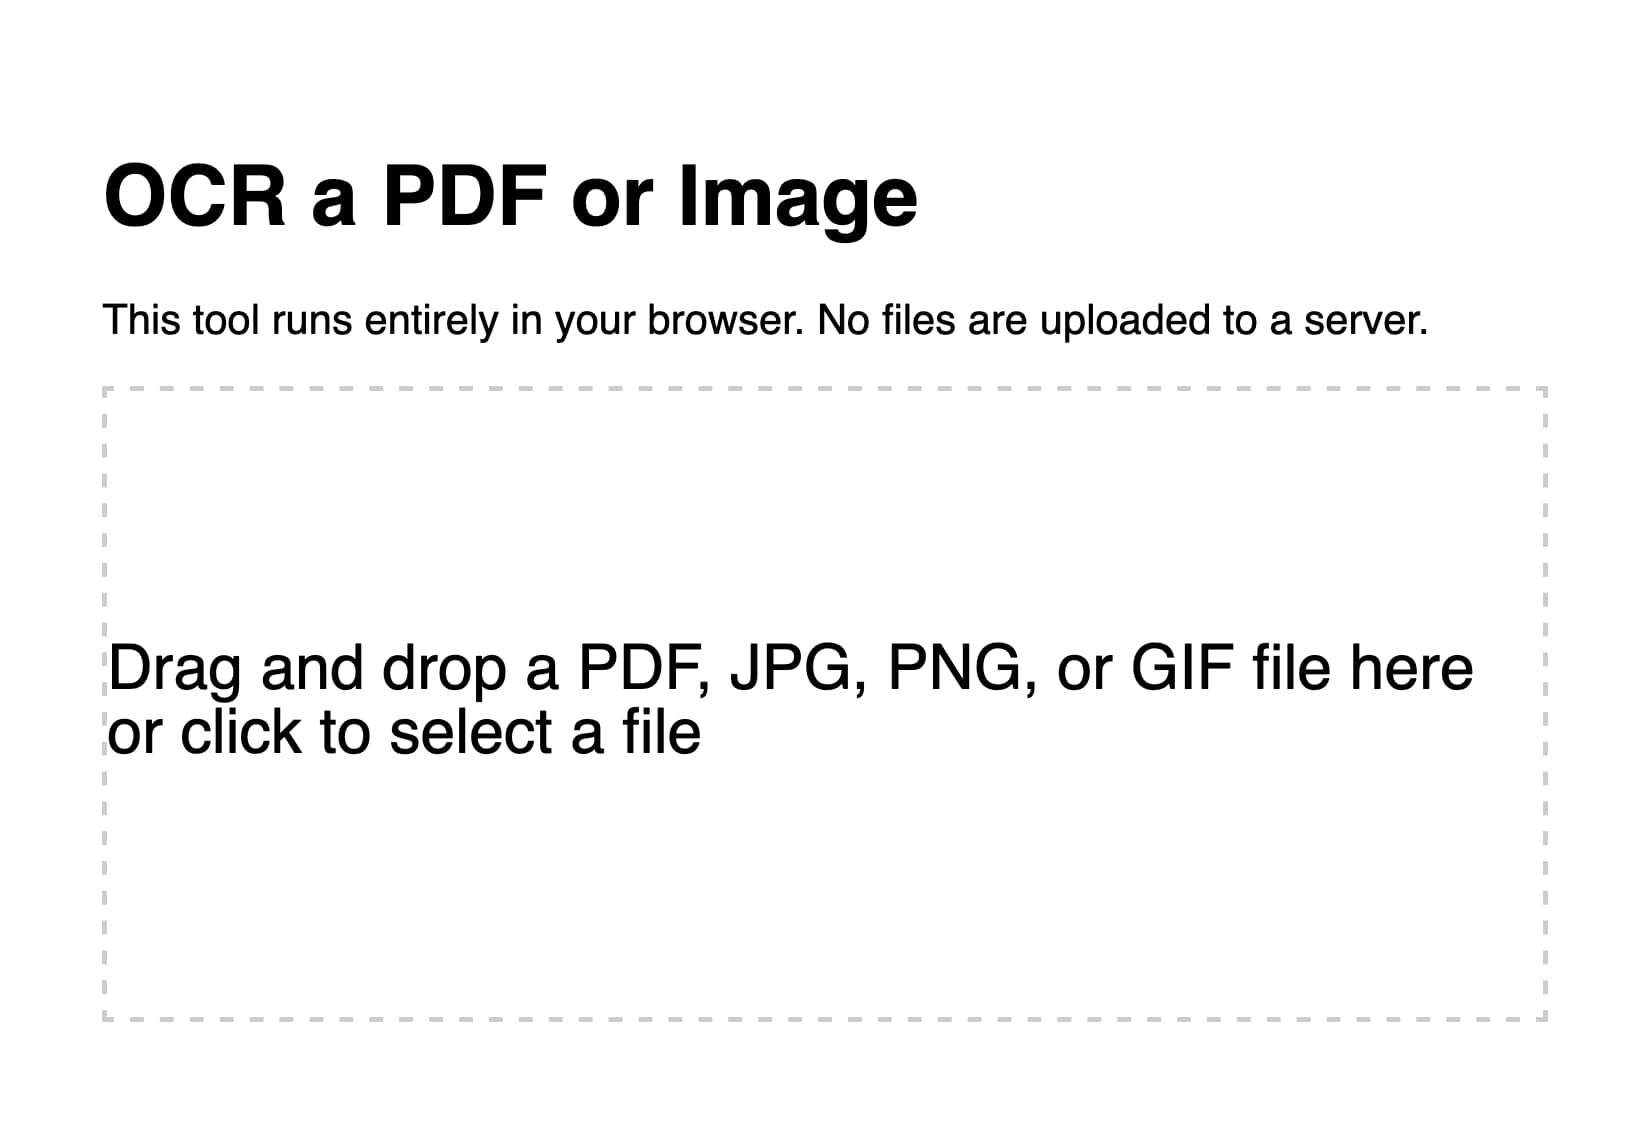 A heading reads OCR a PDF or Image - This tool runs entirely in your browser. No files are uploaded to a server. The dotted box now contains text that reads Drag and drop a PDF, JPG, PNG, or GIF file here or click to select a file